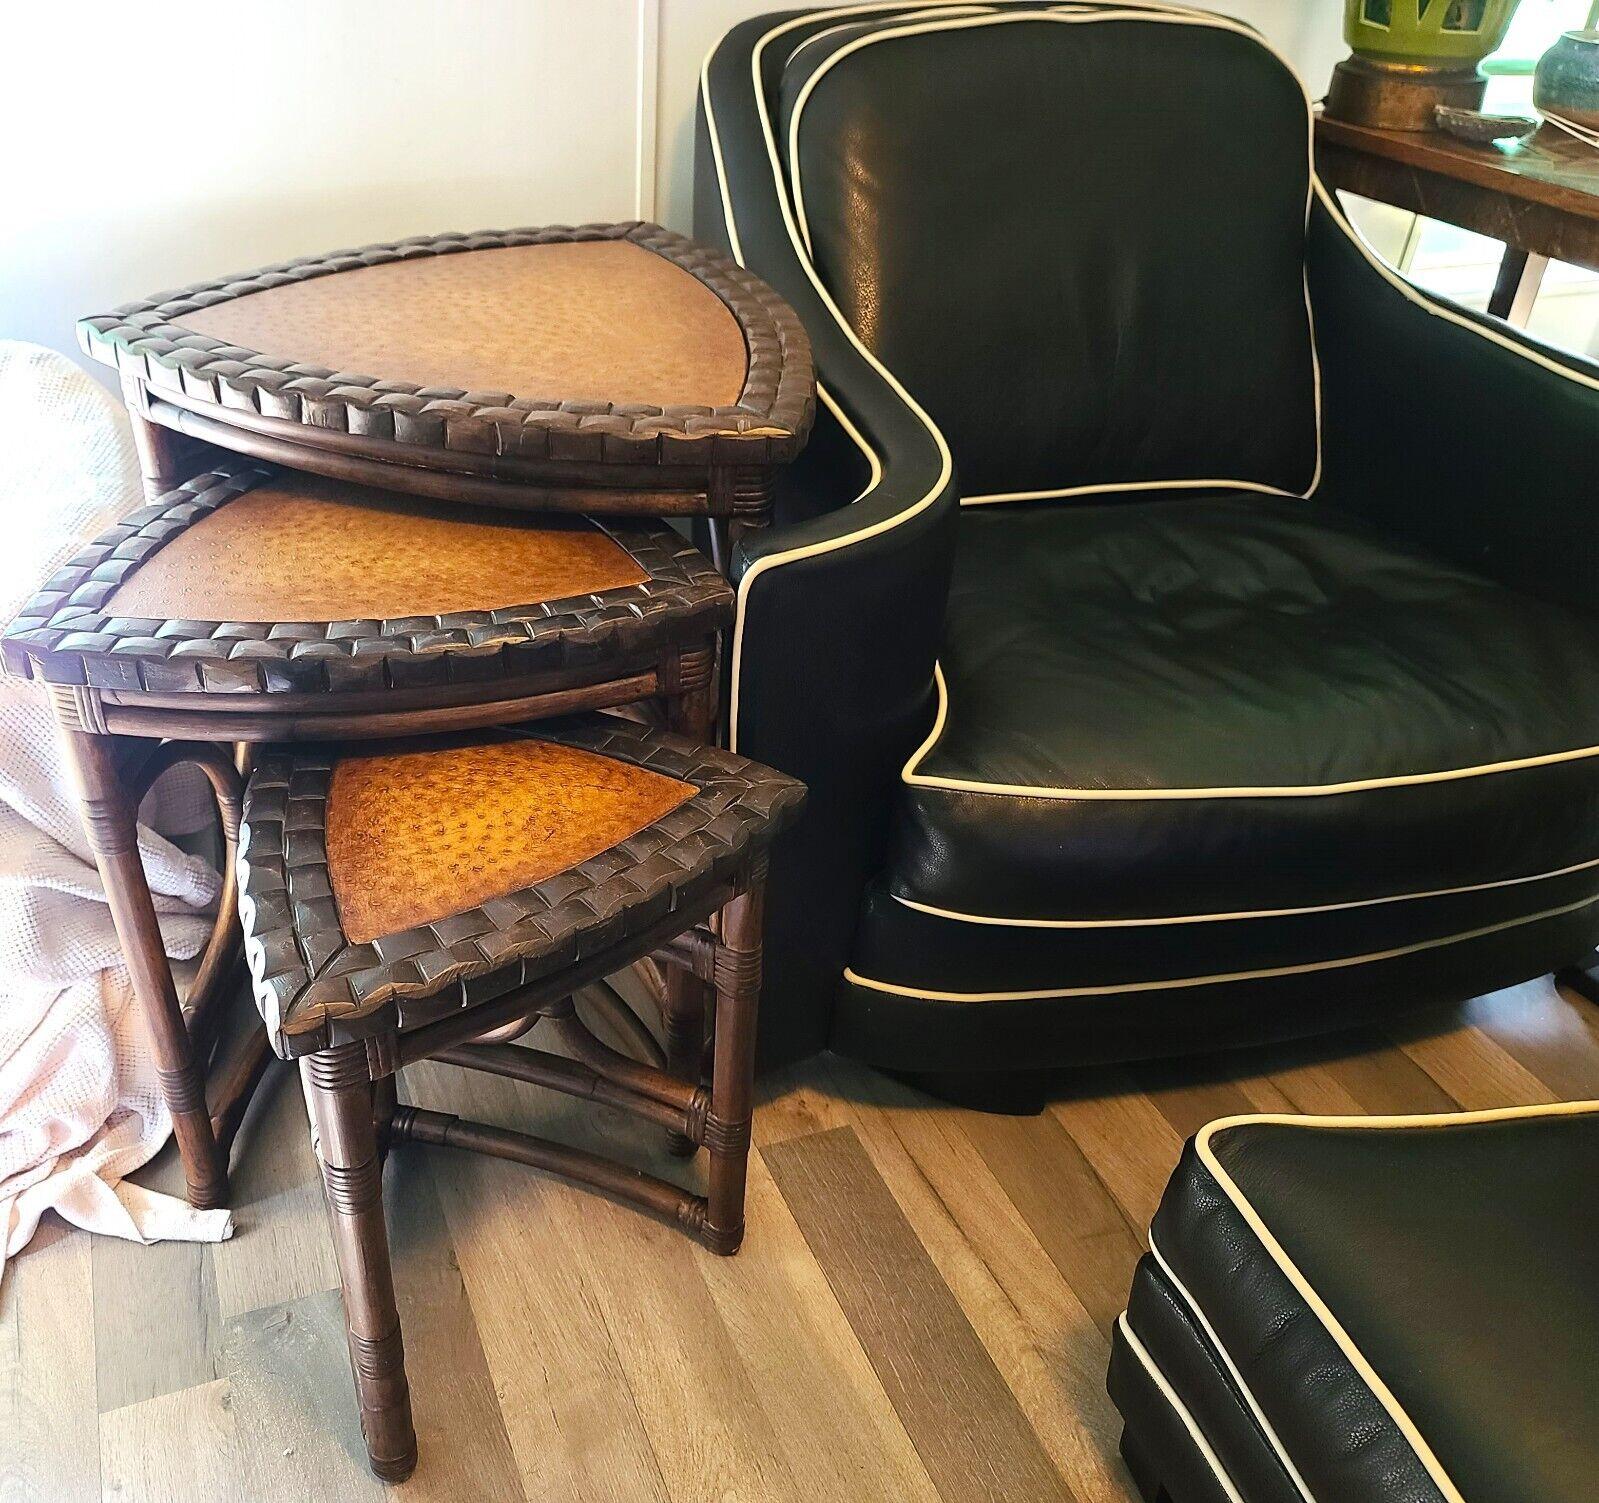 For FULL item description be sure to click on CONTINUE READING at the bottom of this listing.

Offering one of our recent palm beach estate fine furniture acquisitions of a
(3) vintage bamboo, rattan, coconut shell, & faux ostrich nesting